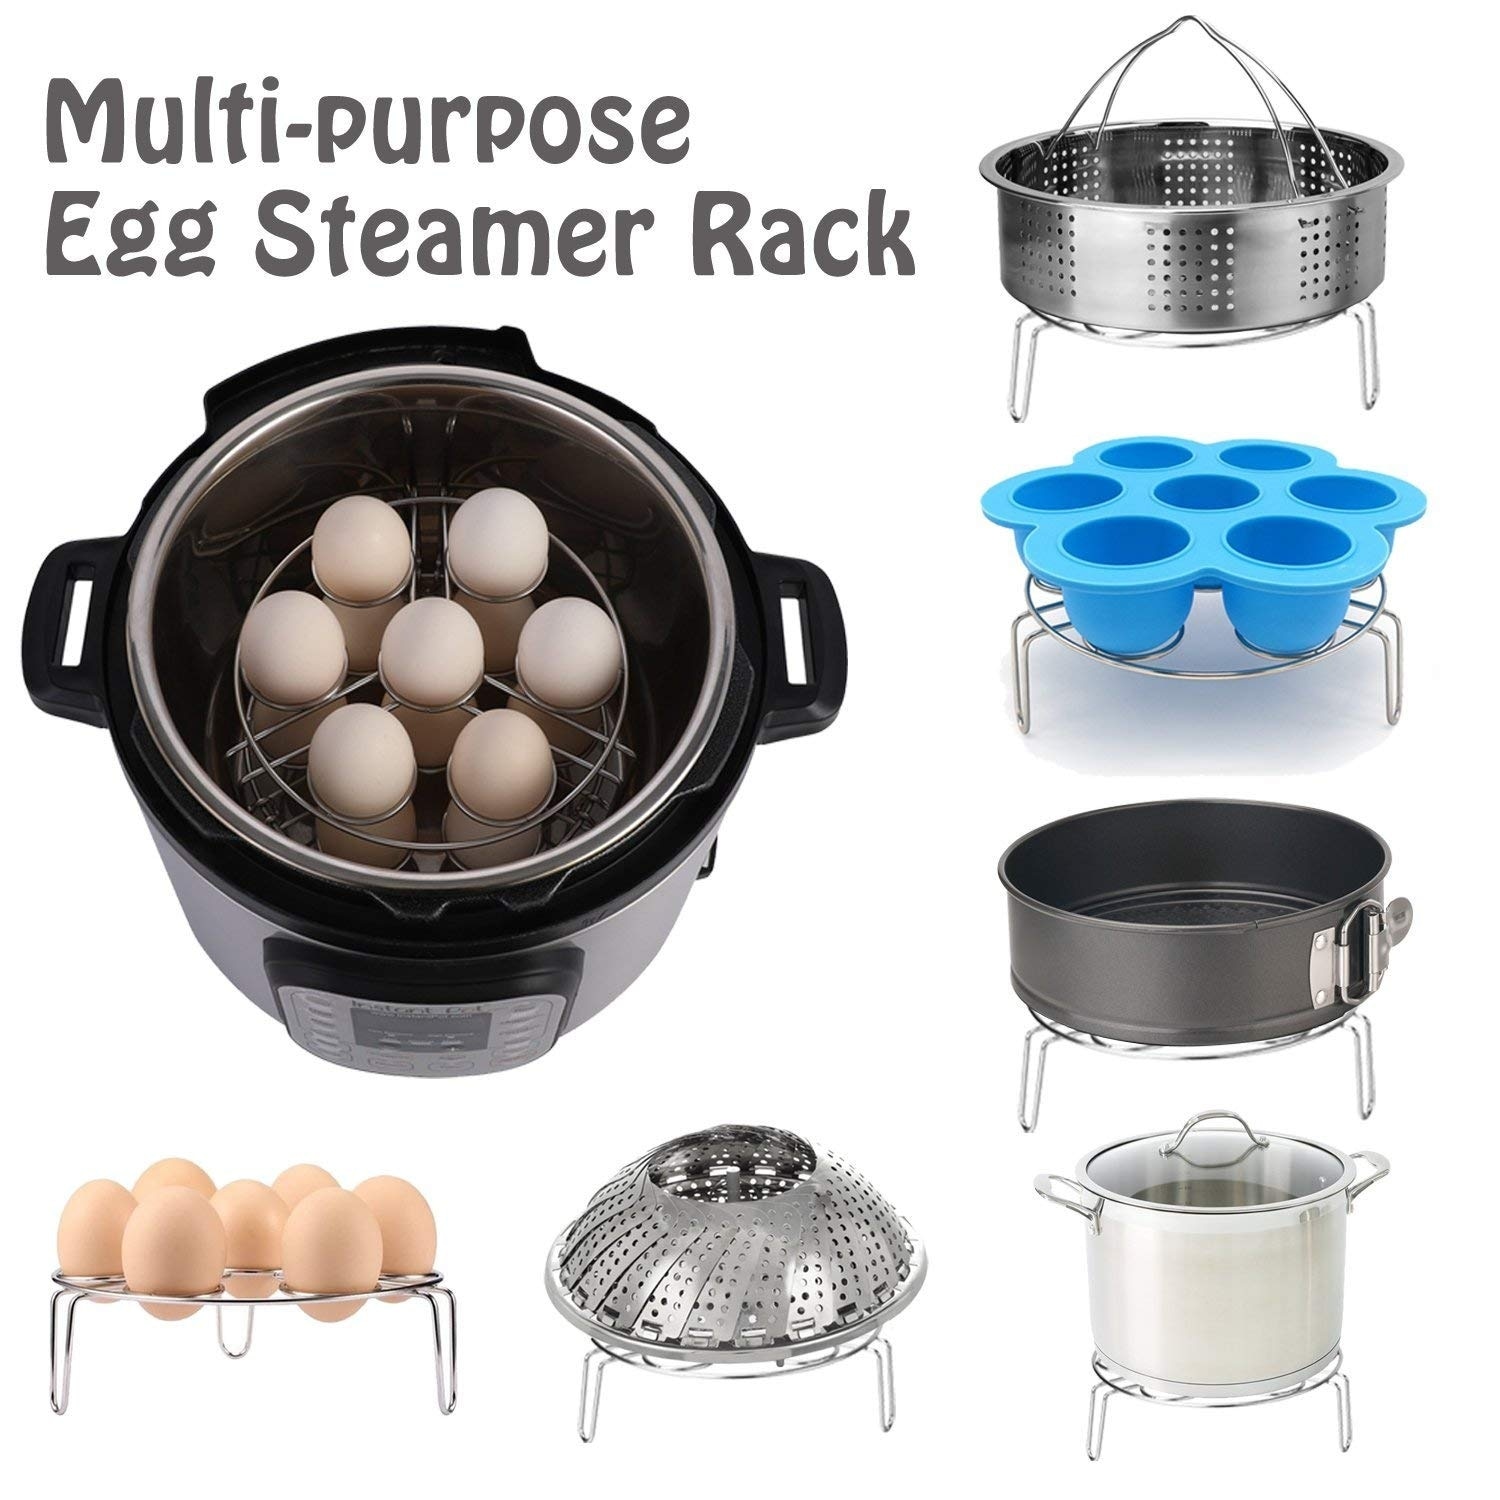 https://ak1.ostkcdn.com/images/products/is/images/direct/f6422dc5d4d3e3c8aa7cb6ed0346da0b7f14d5bd/8-Pack-Steamer-Basket-Egg-Steam-Rack-Camping-Cooking-Set.jpg